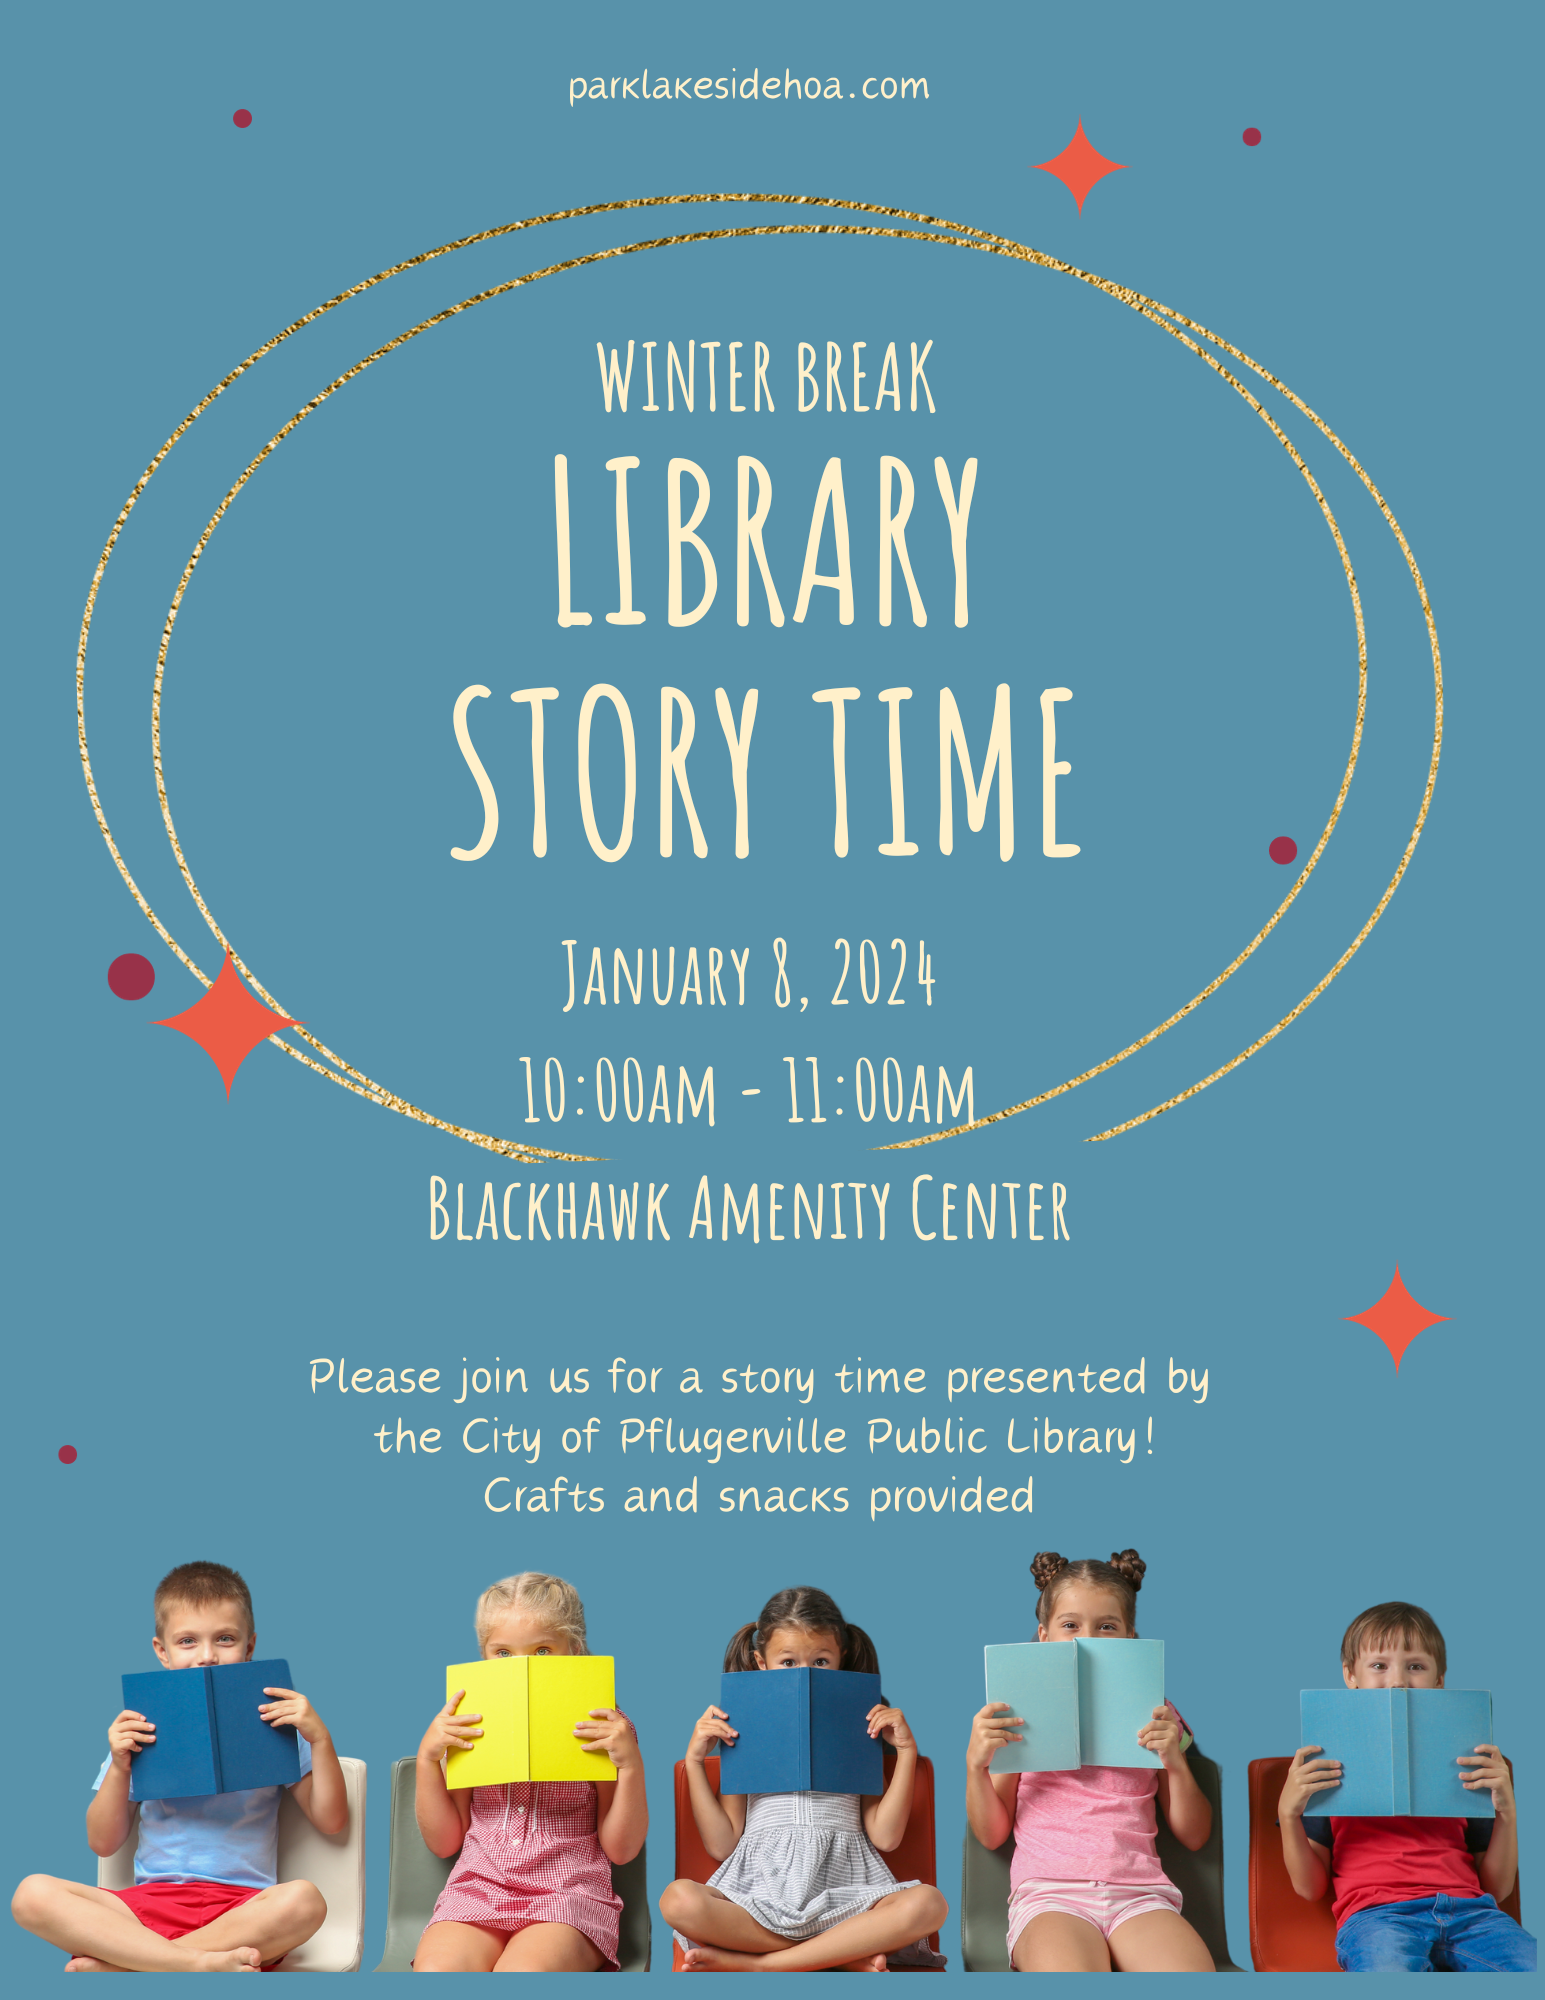 parklakesidehoa.com WINTER BREAK LIBRARY STORY TIME JANUARY 8, 2024 10:00AM - 11:00AM. BLACKHAWK AMENITY CENTER Please join us for a story time presented by the City of Pflugerville Public Library! Crafts and snacks provided